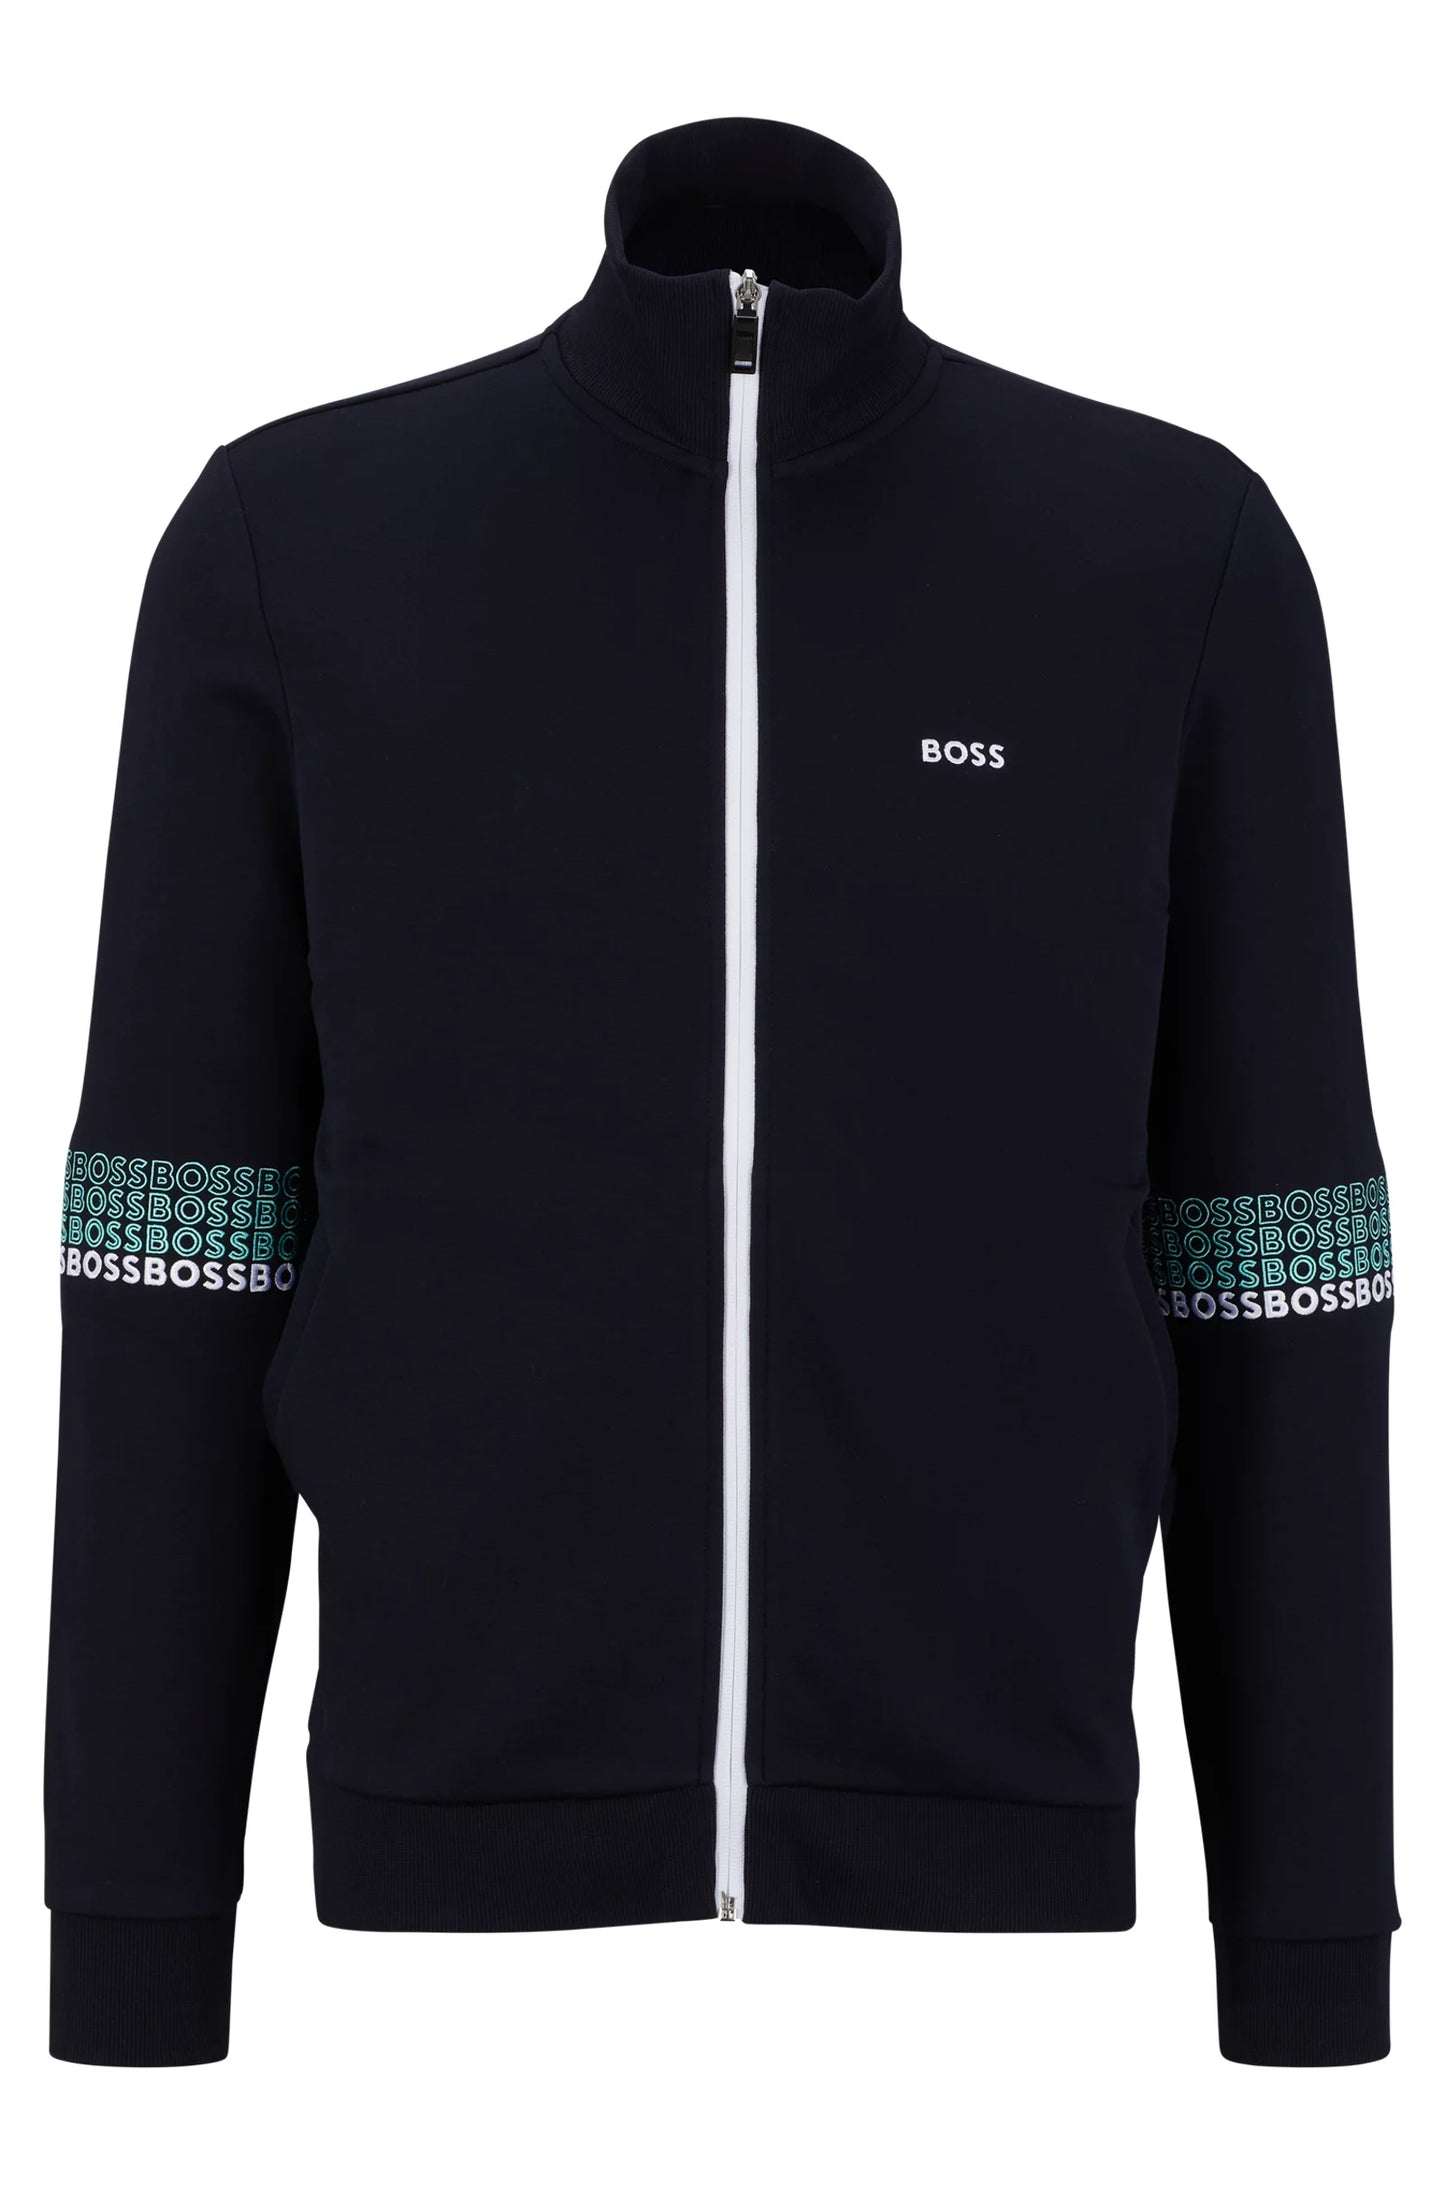 Cotton-Blend Zip-Up Sweatshirt with Multi-colored logos